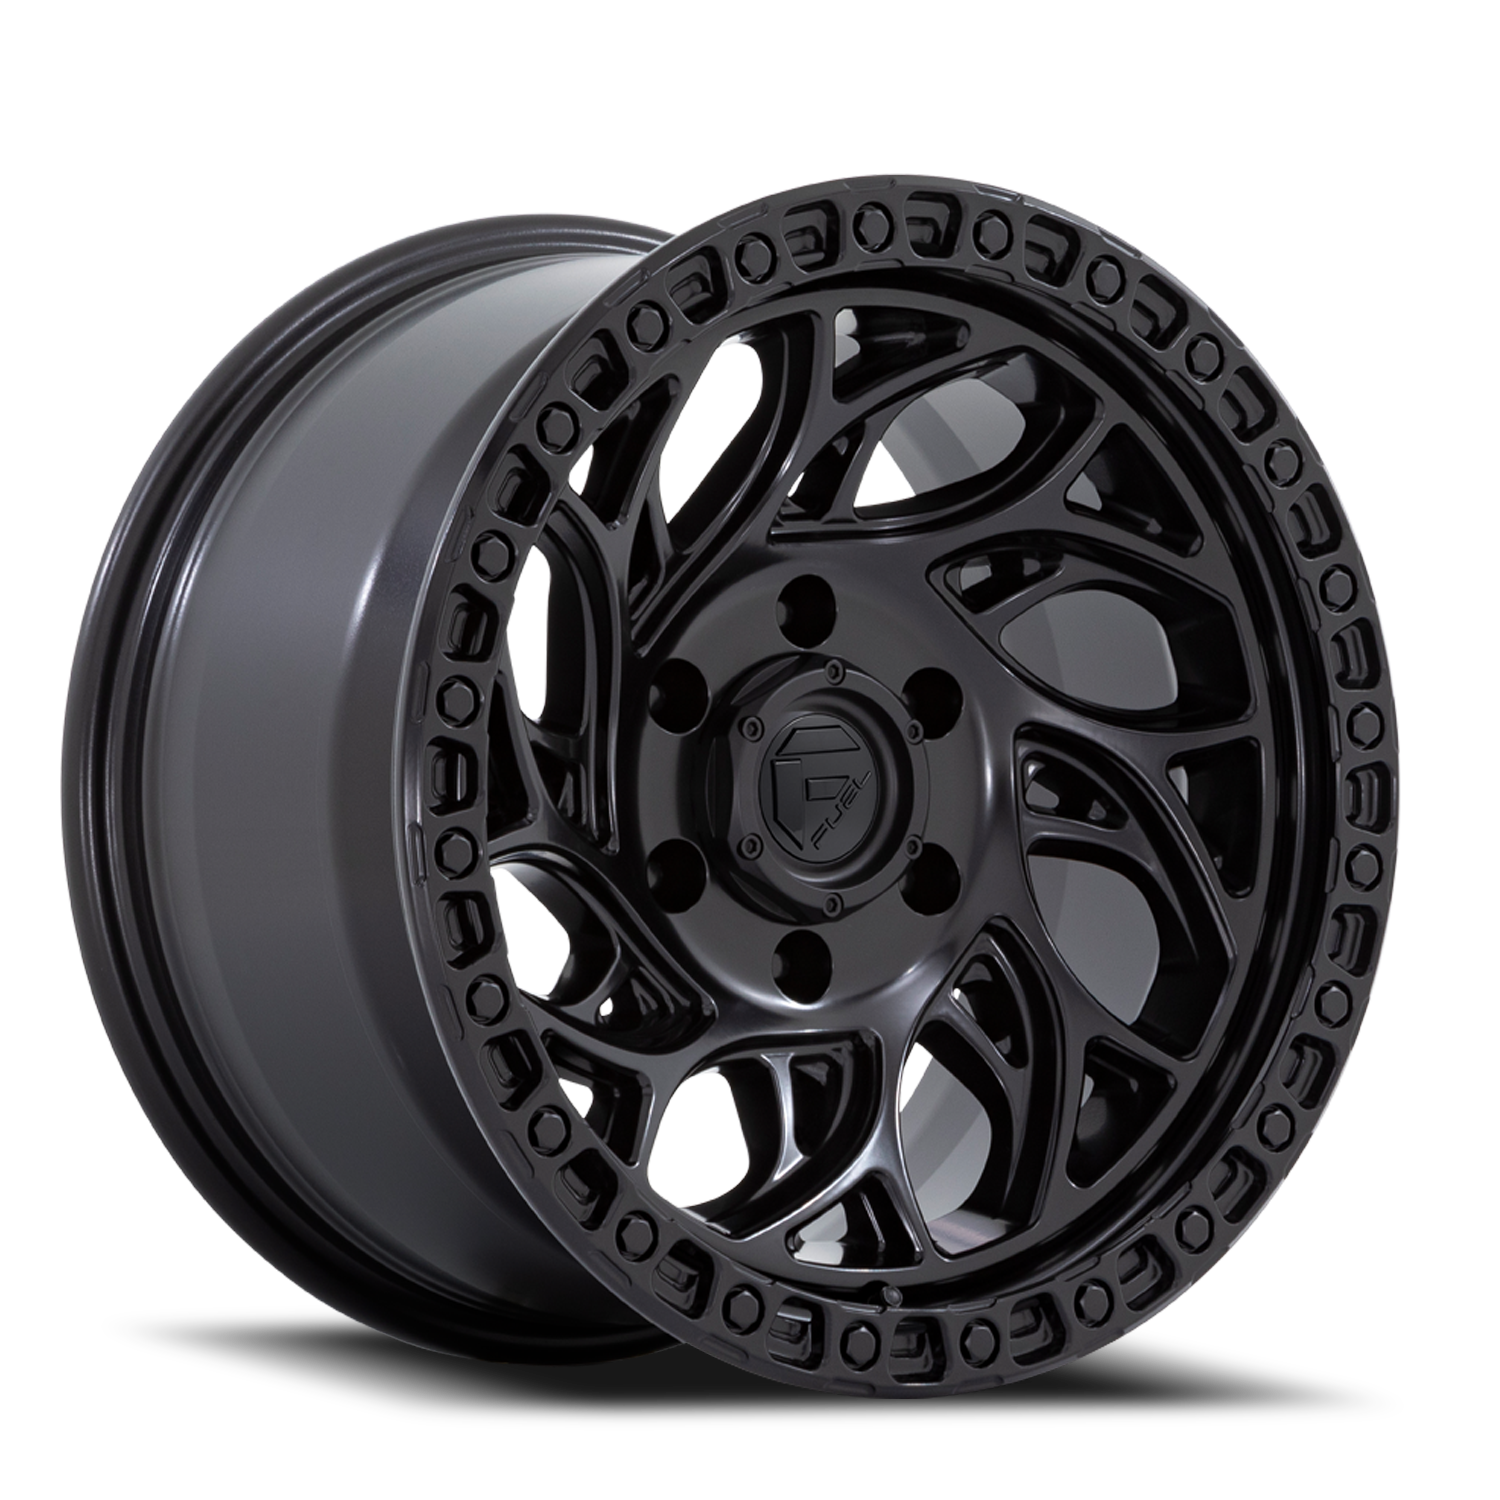 Aluminum Wheels 20X9 Runner OR D852 5 On 139.7 Blackout 78.1 Bore 1 Offset Fuel Off Road Wheels